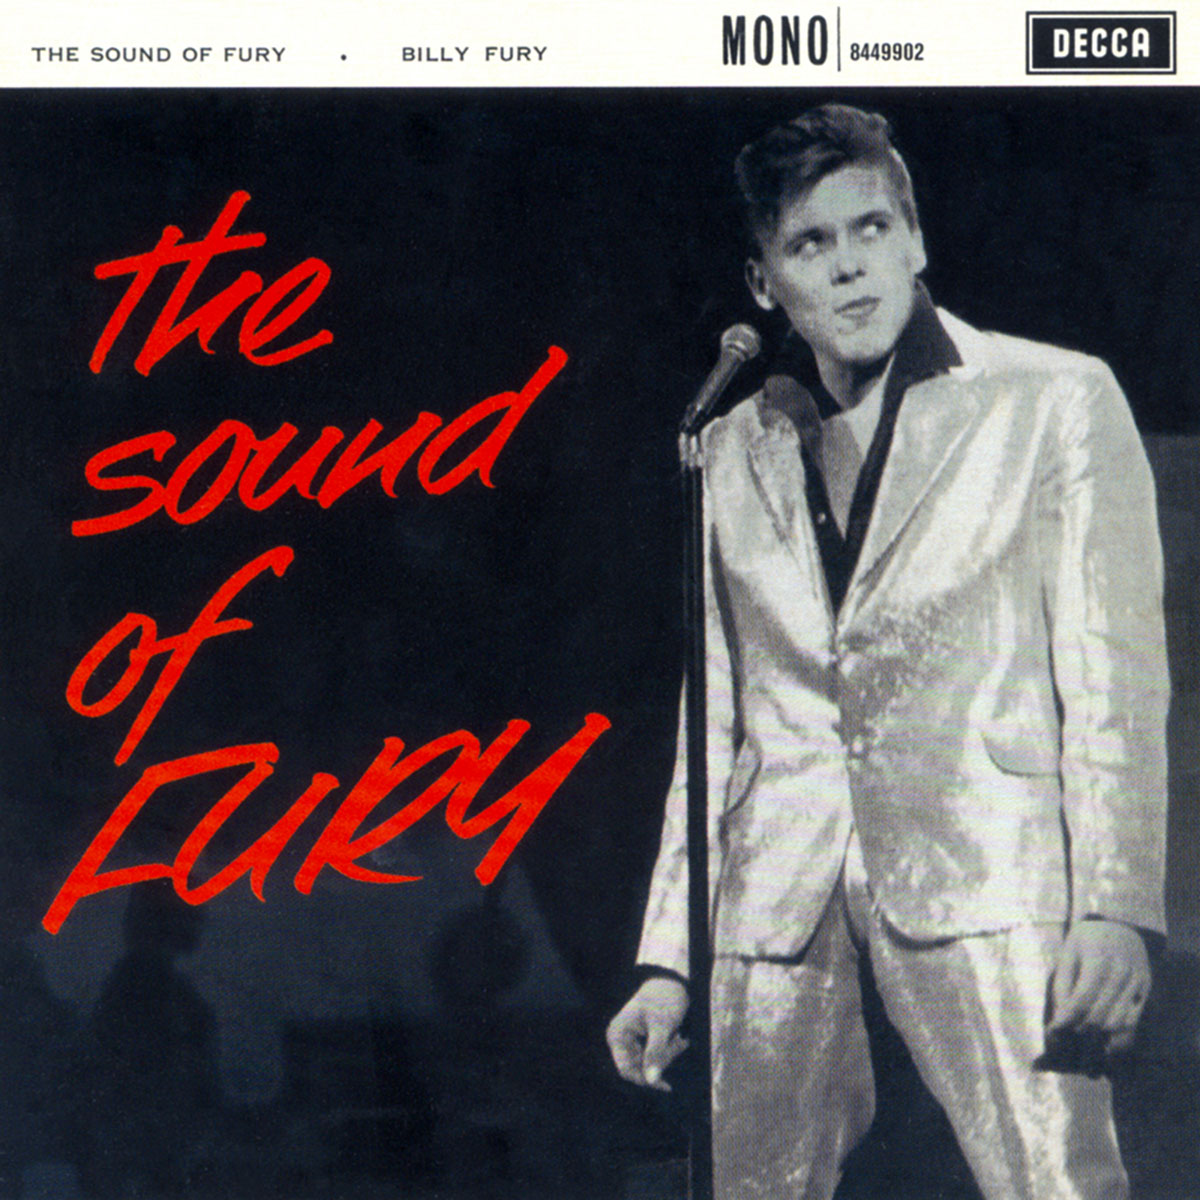 The album cover for Billy Fury’s debut nineteen sixty album titled “The Sound of Fury.”